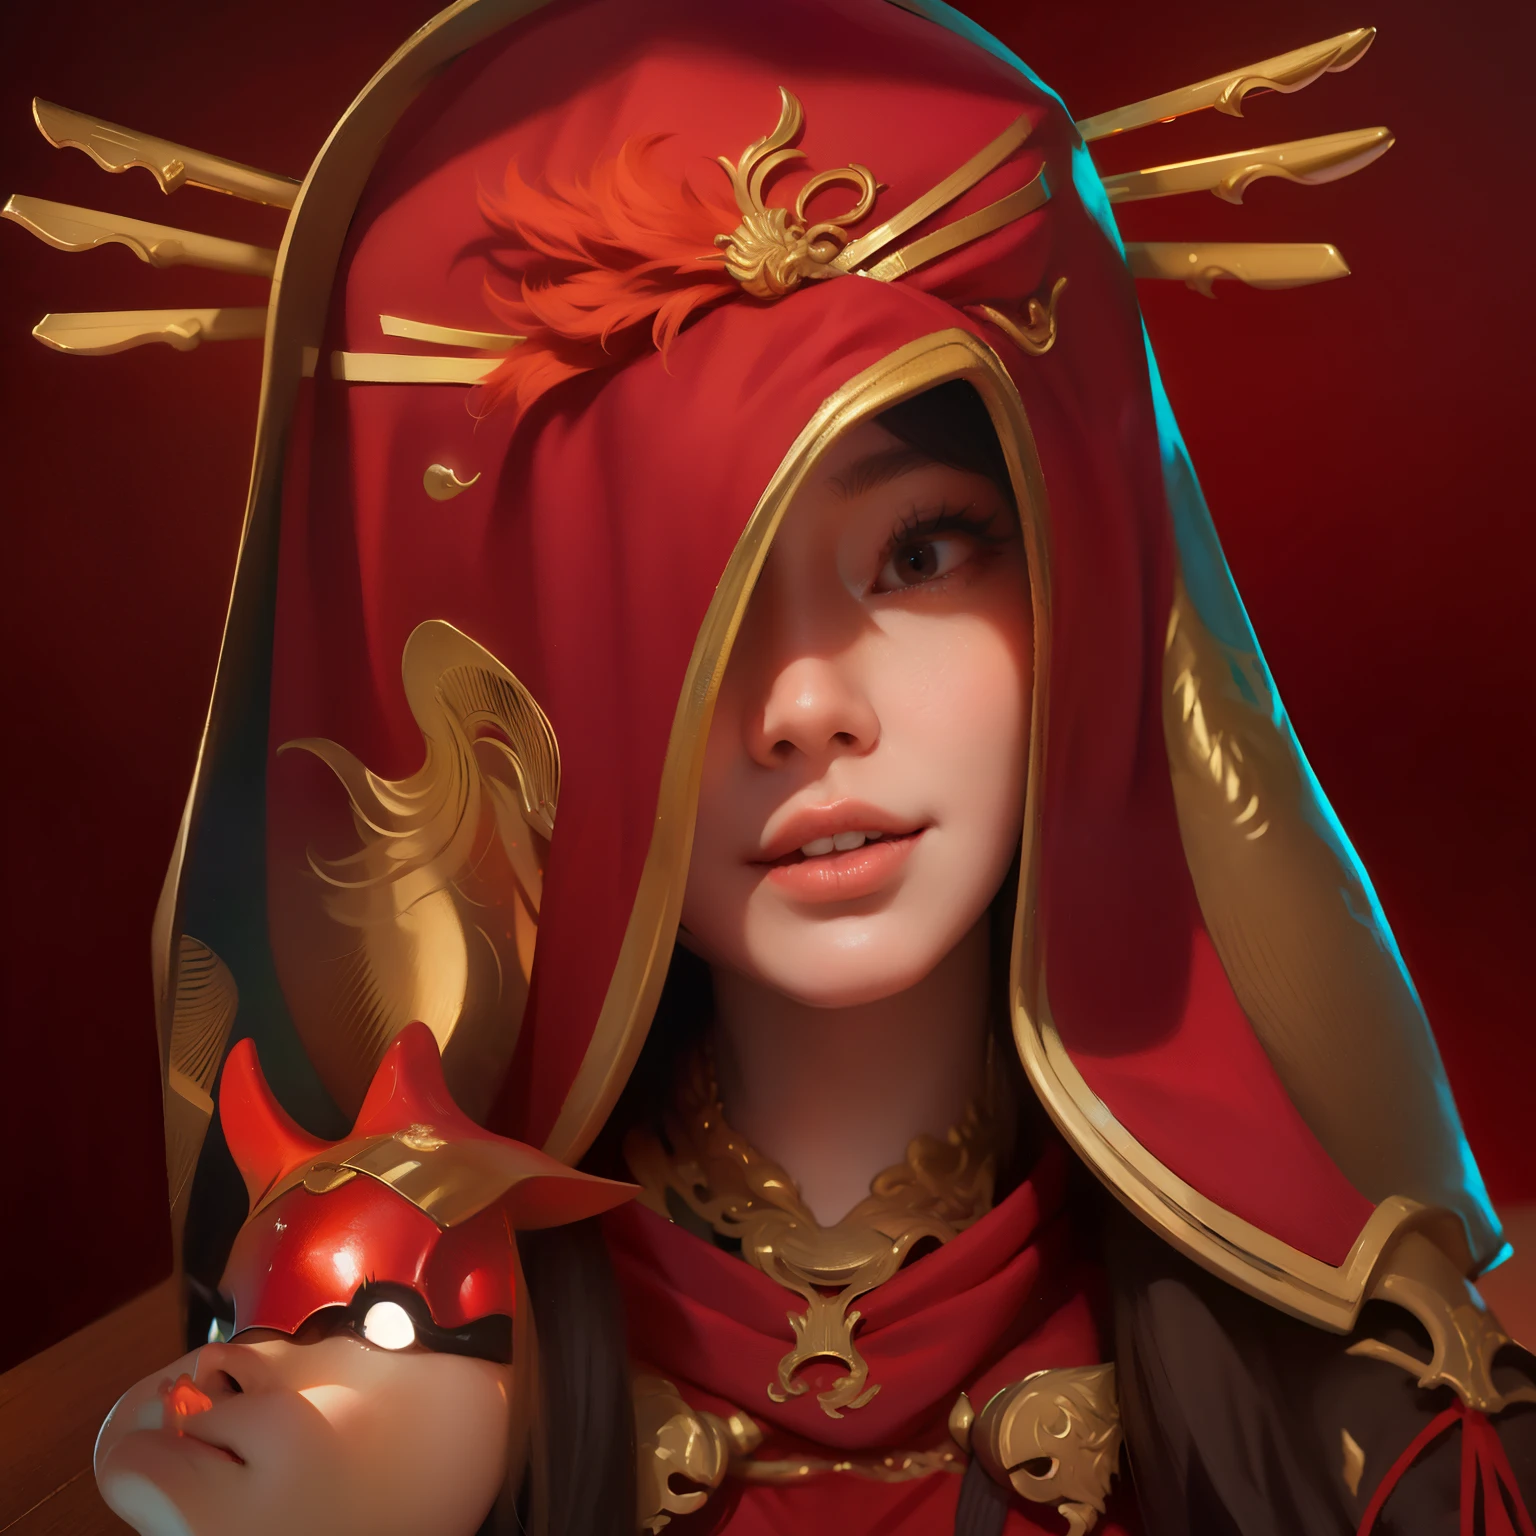 arafed woman in a red dress with a mask and a red mask, inspired by Ju Lian, inspired by Li Mei-shu, inspired by Lan Ying, portrait of a red sorcerer, digital fantasy art ), inspired by Wu Li, digital art fantasy art, inspired by Lü Ji, red adornments, inspired by Ai Xuan